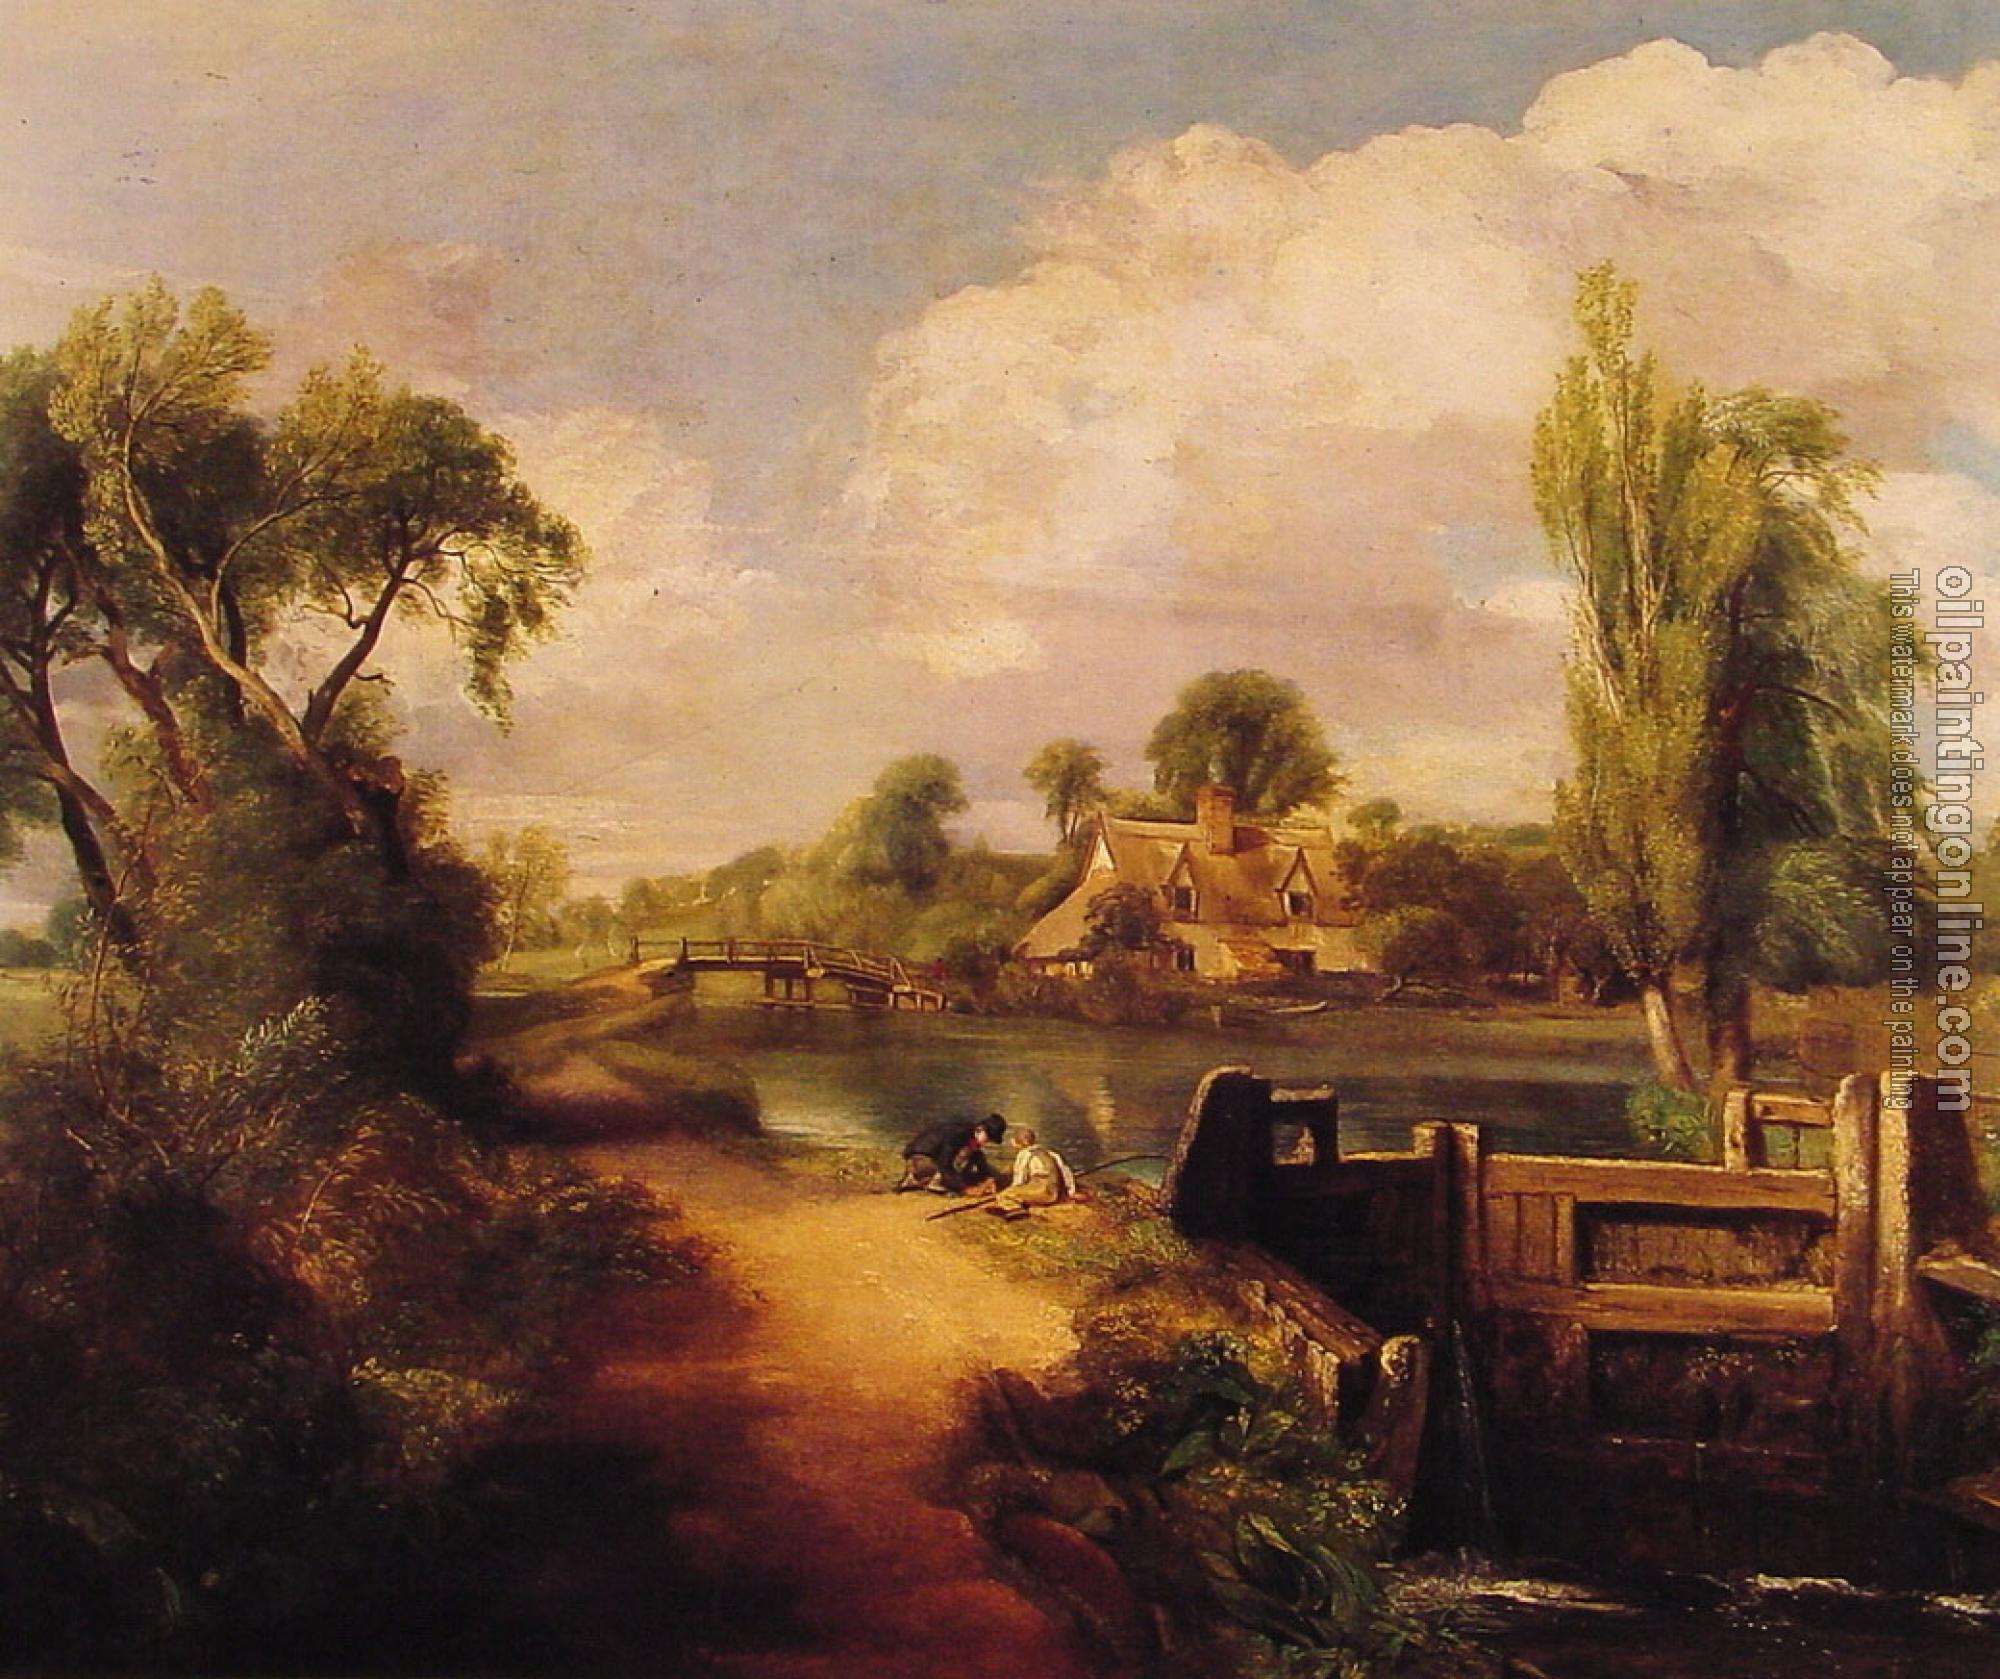 Constable, John - Landscape with Boys Fishing